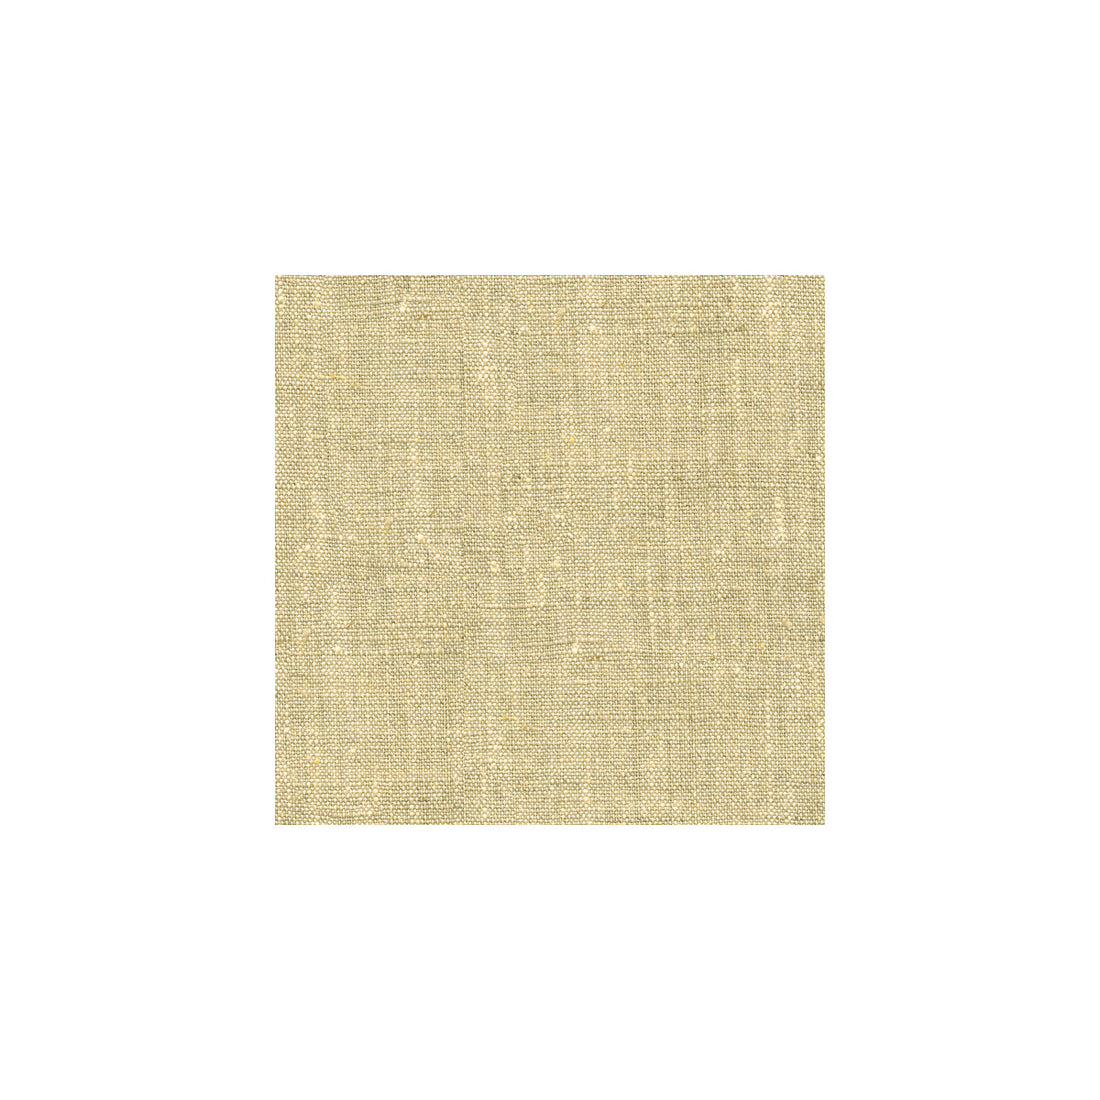 Oakwood fabric in linen color - pattern 32814.16.0 - by Kravet Basics in the Thom Filicia collection